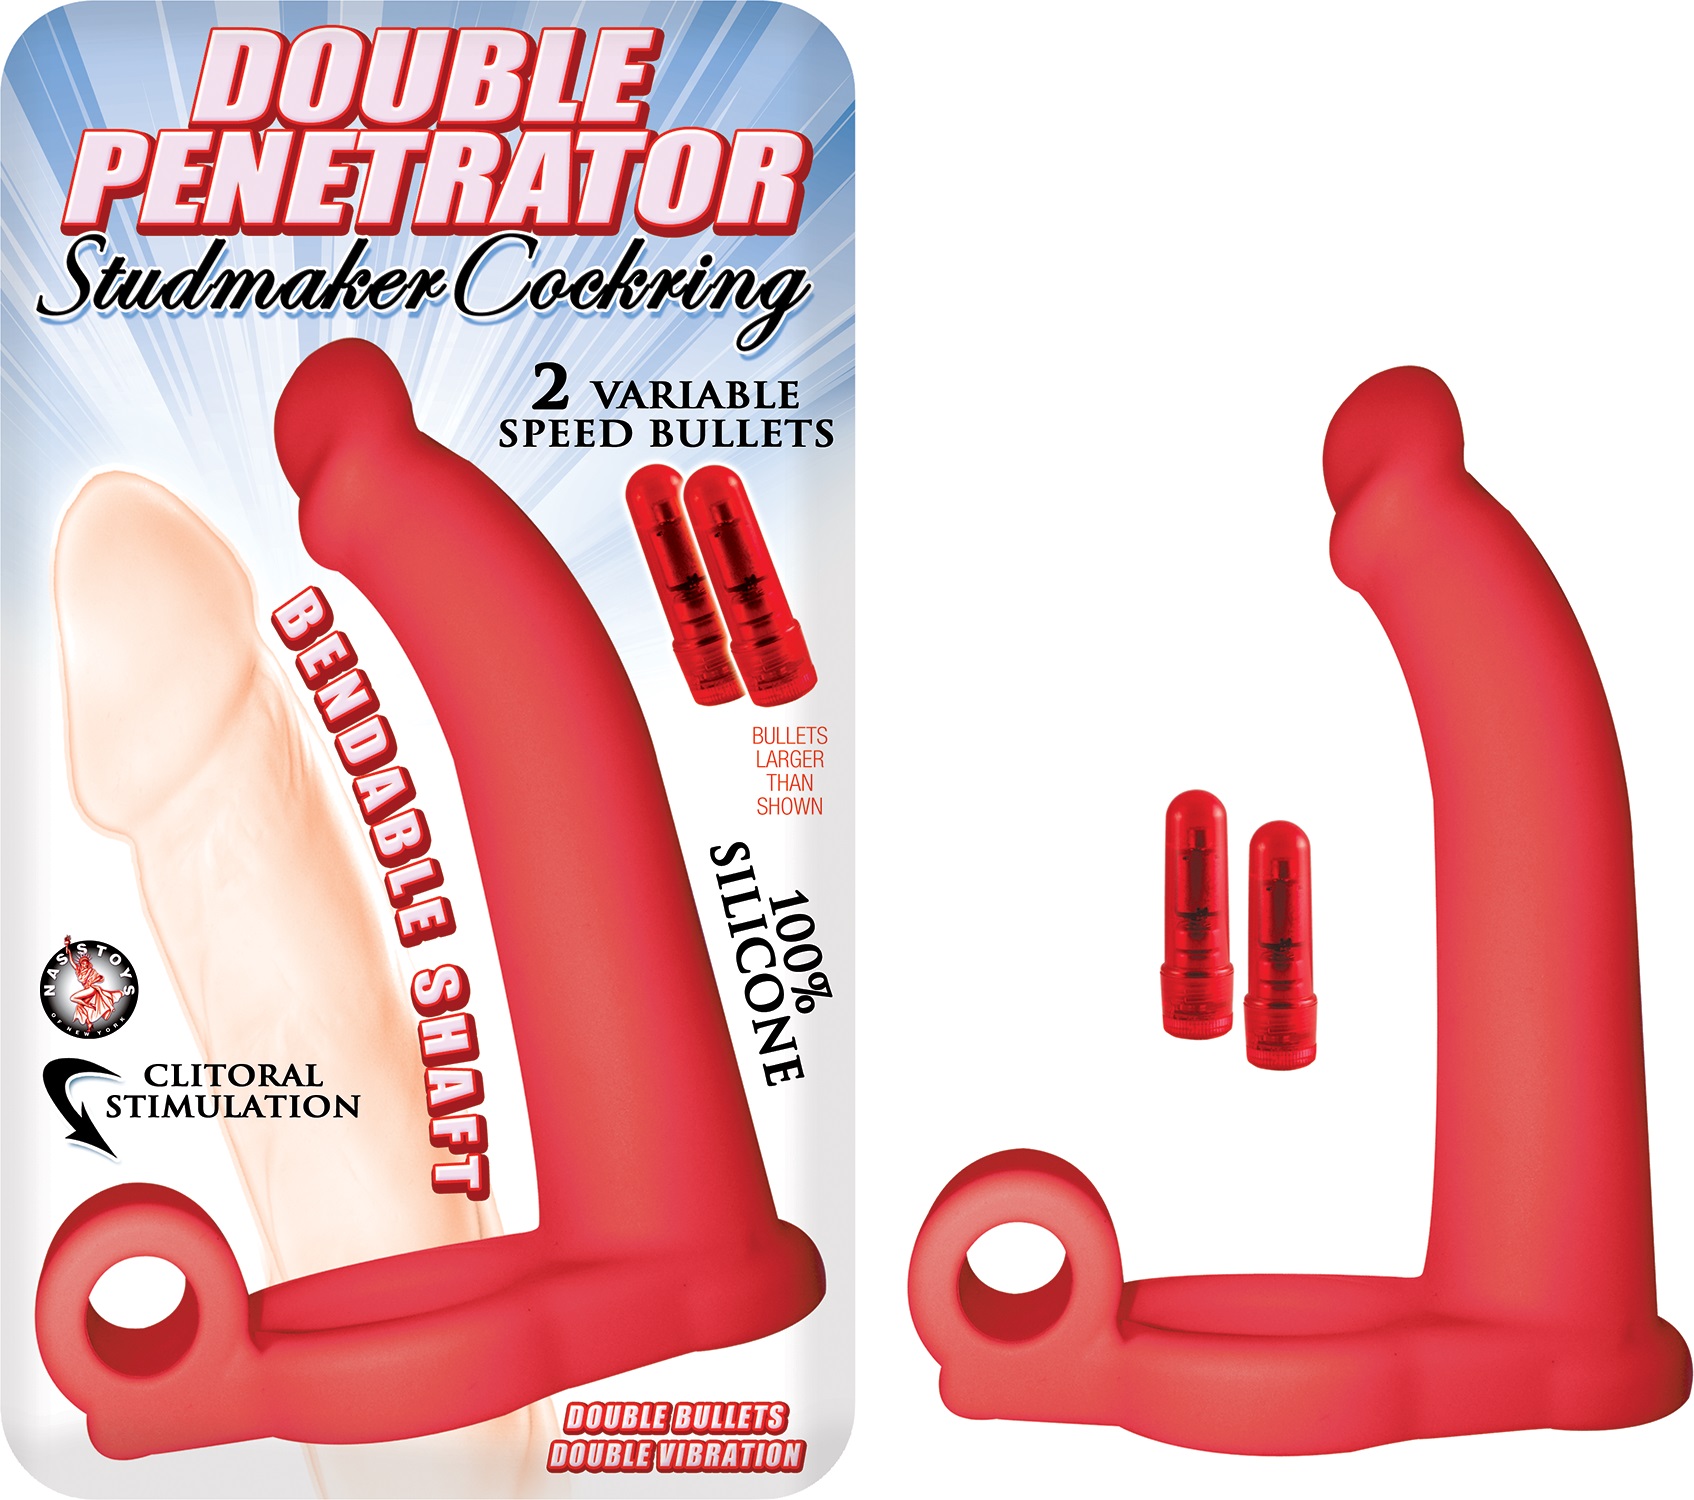 Double+Penetrator+Studmaker+Silicone+Cockring